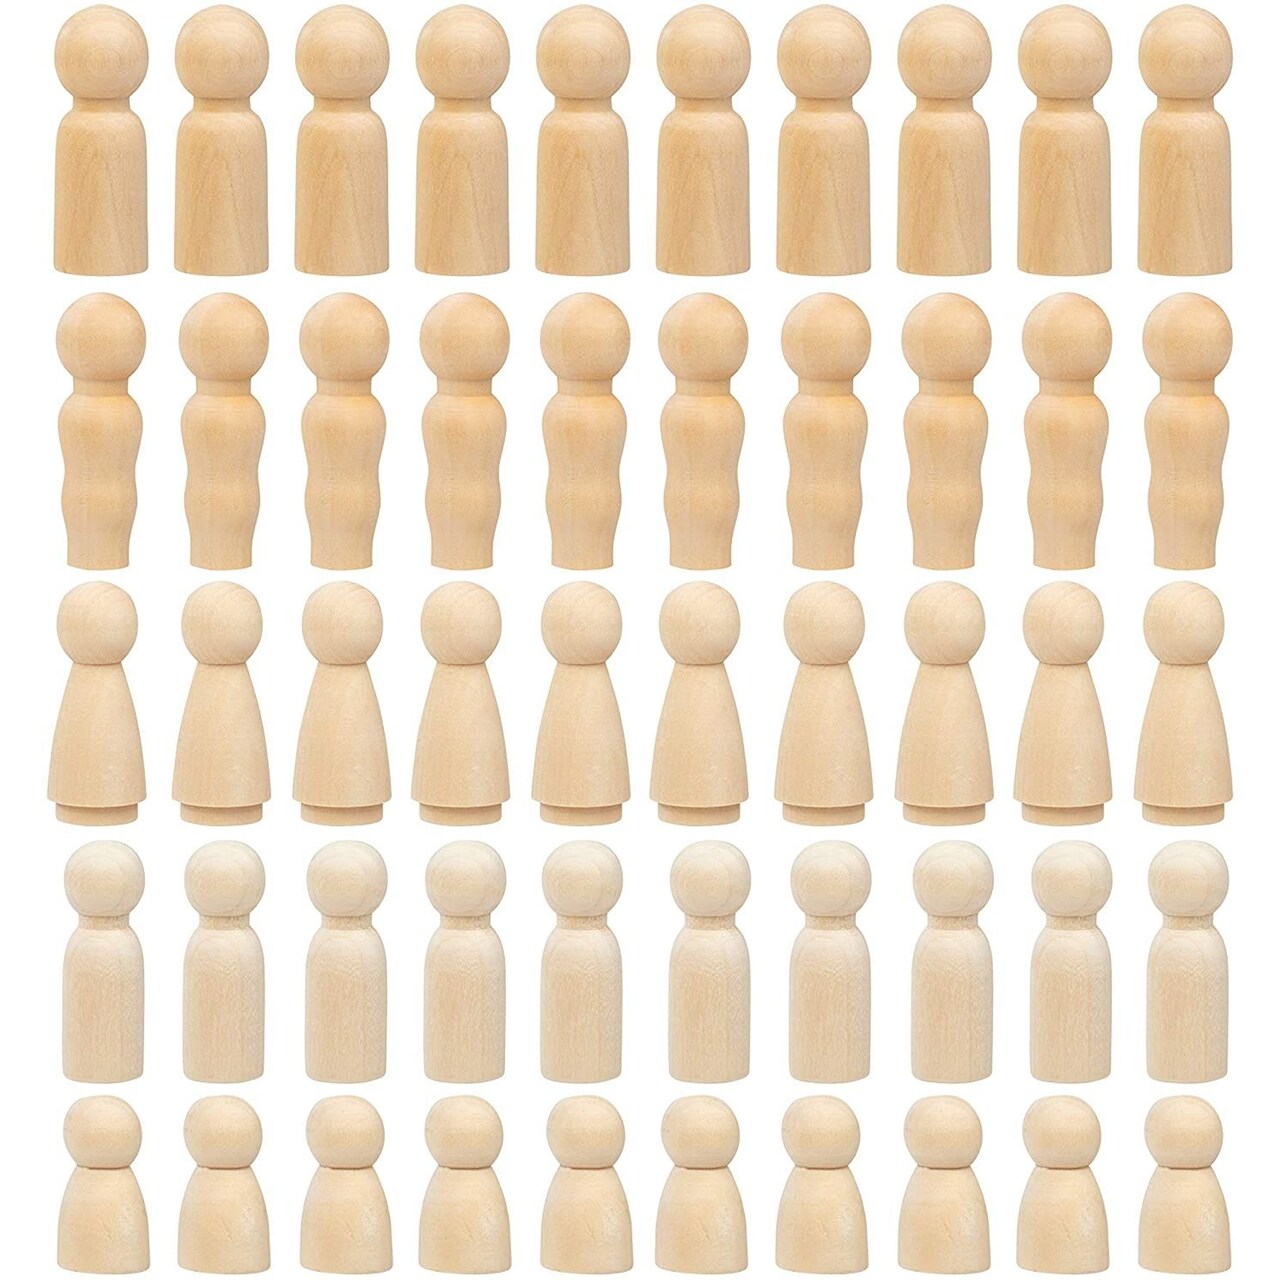 50 Pieces Unfinished Wood Peg Dolls, Wooden People Figures for